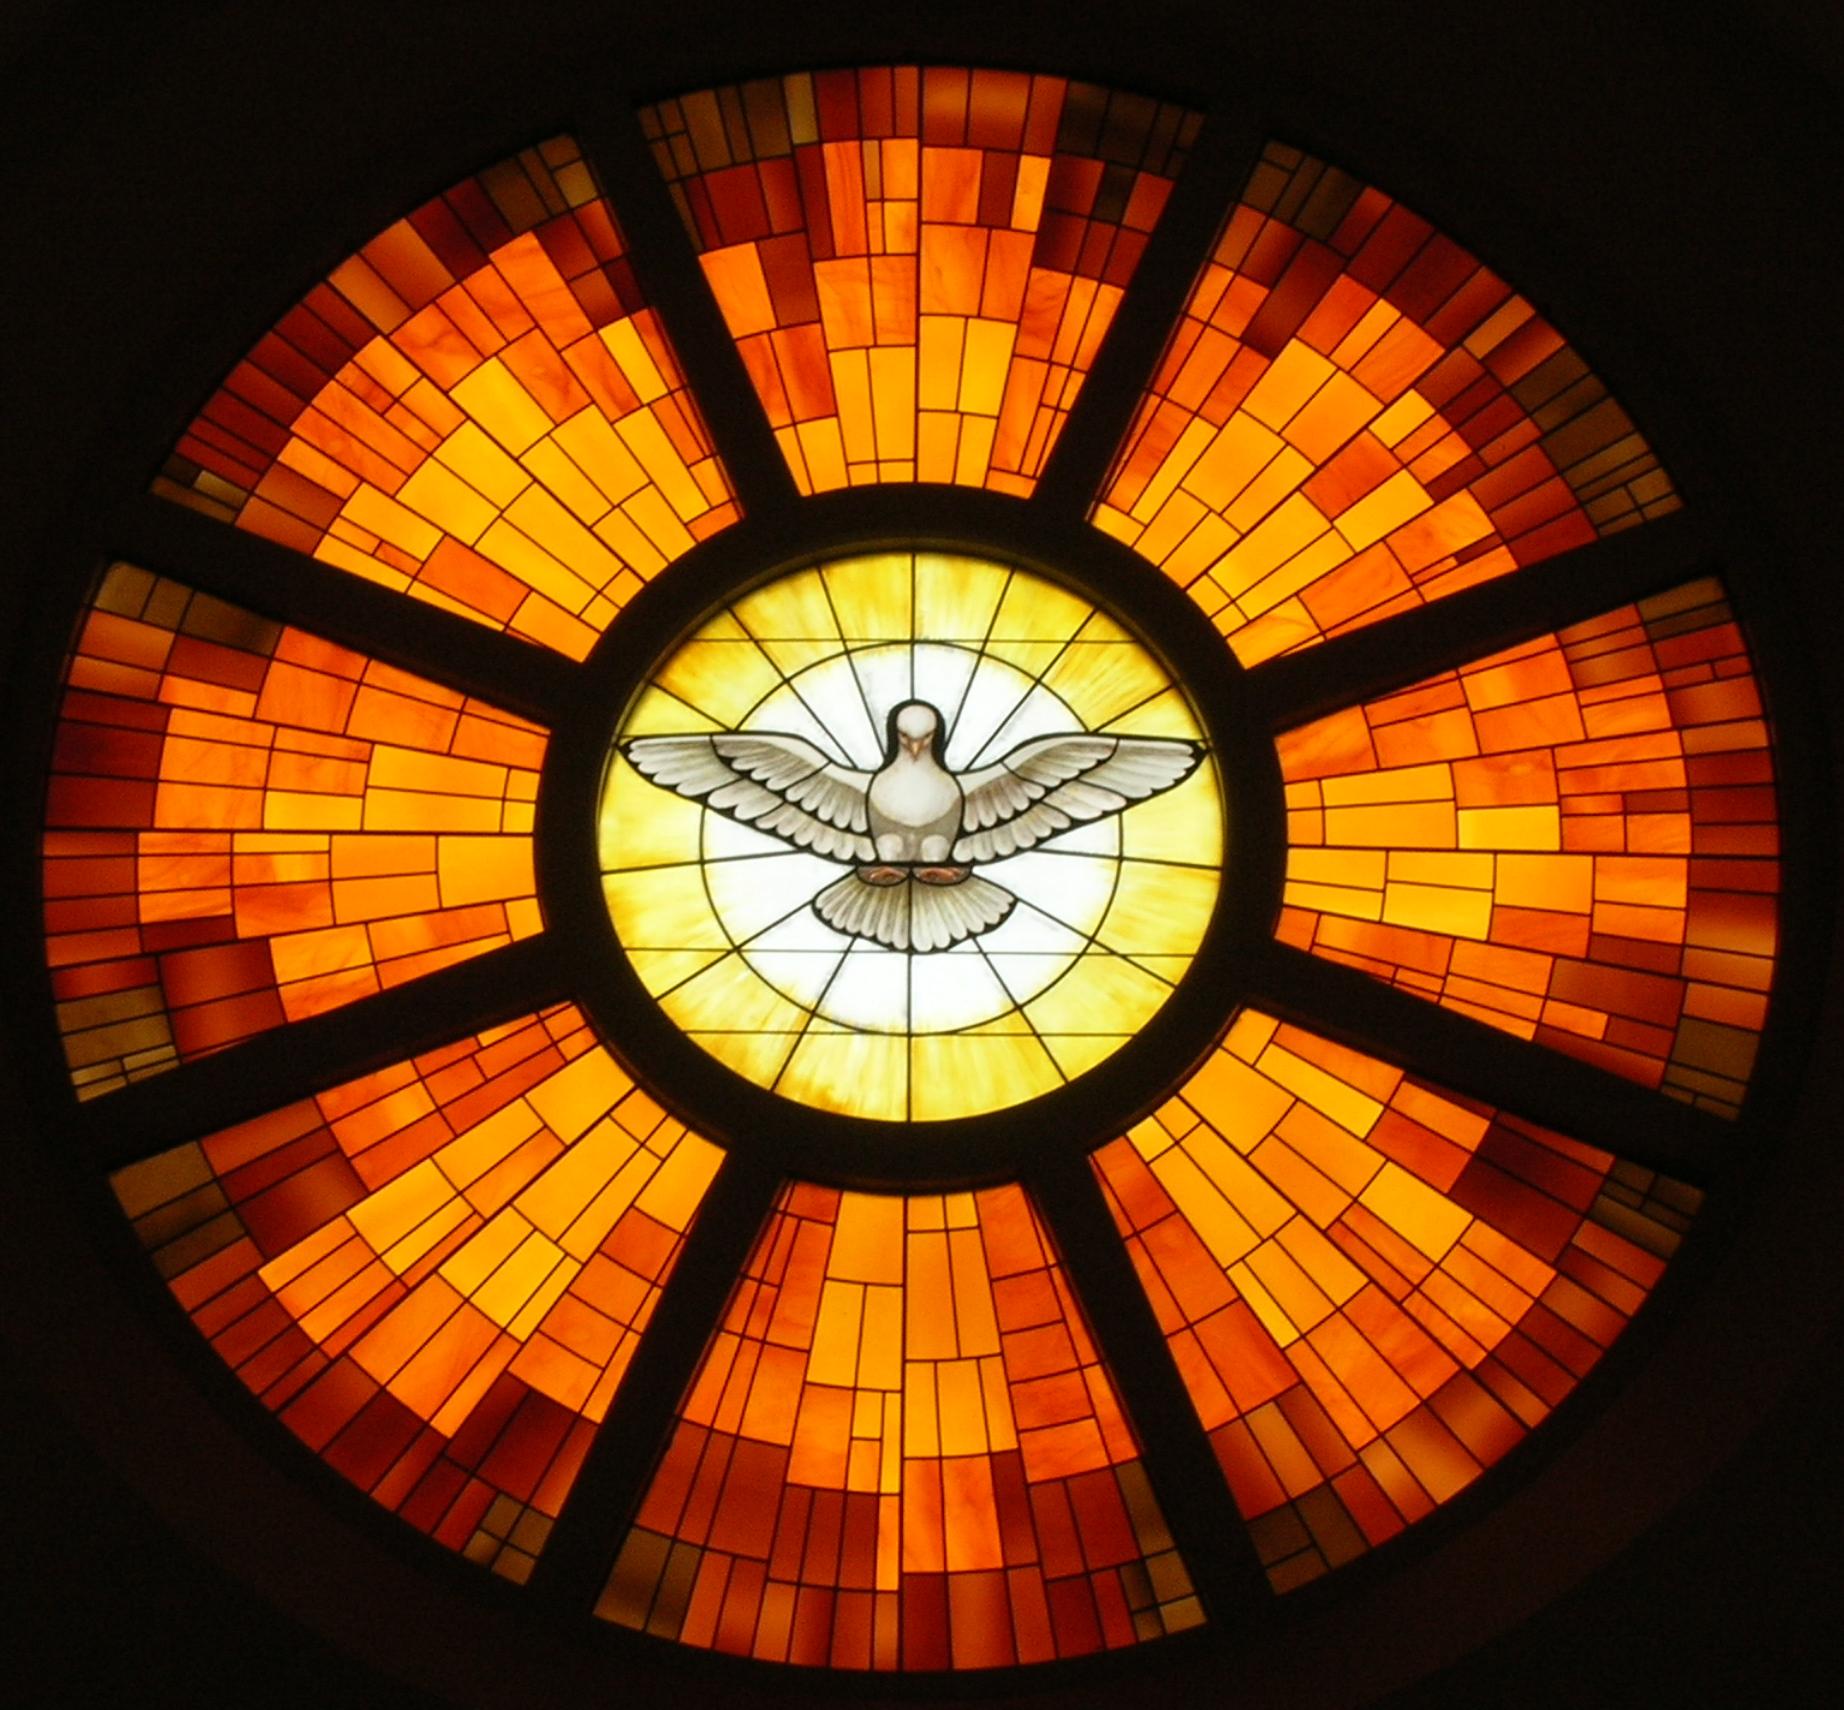 A picture of a stain glass window. It is a Christian Pentecost symbol, with a dove at the center, surrounded by flame.